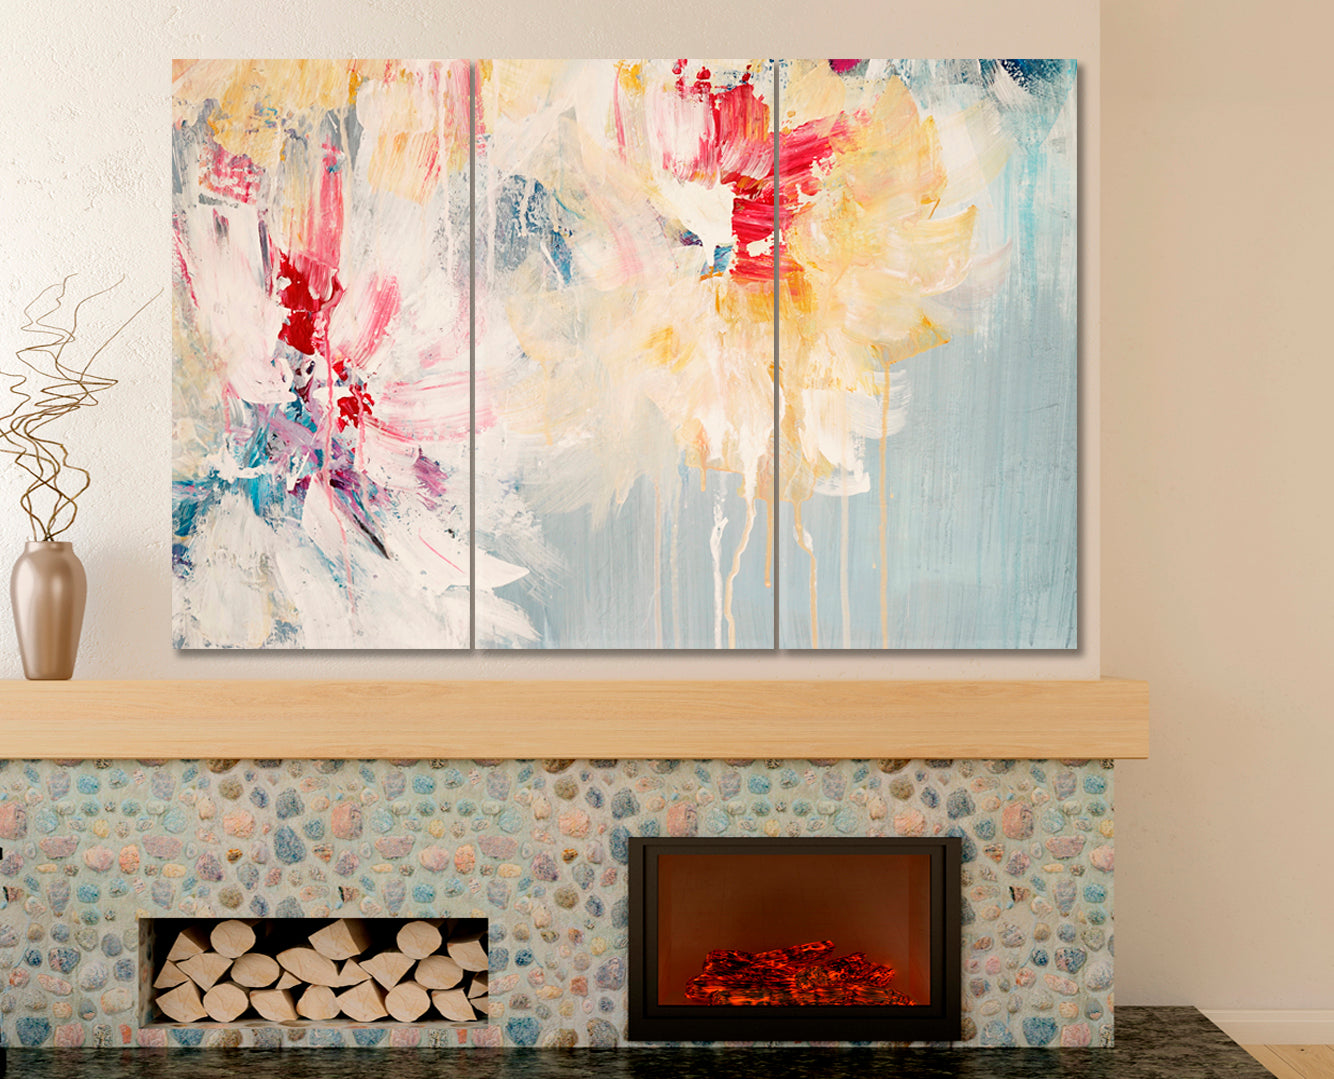 FINE ART Modern Abstract Colorful Acrylic on Canvas Artwork Floral Style Canvas Print Fine Art Artesty 3 panels 36" x 24" 